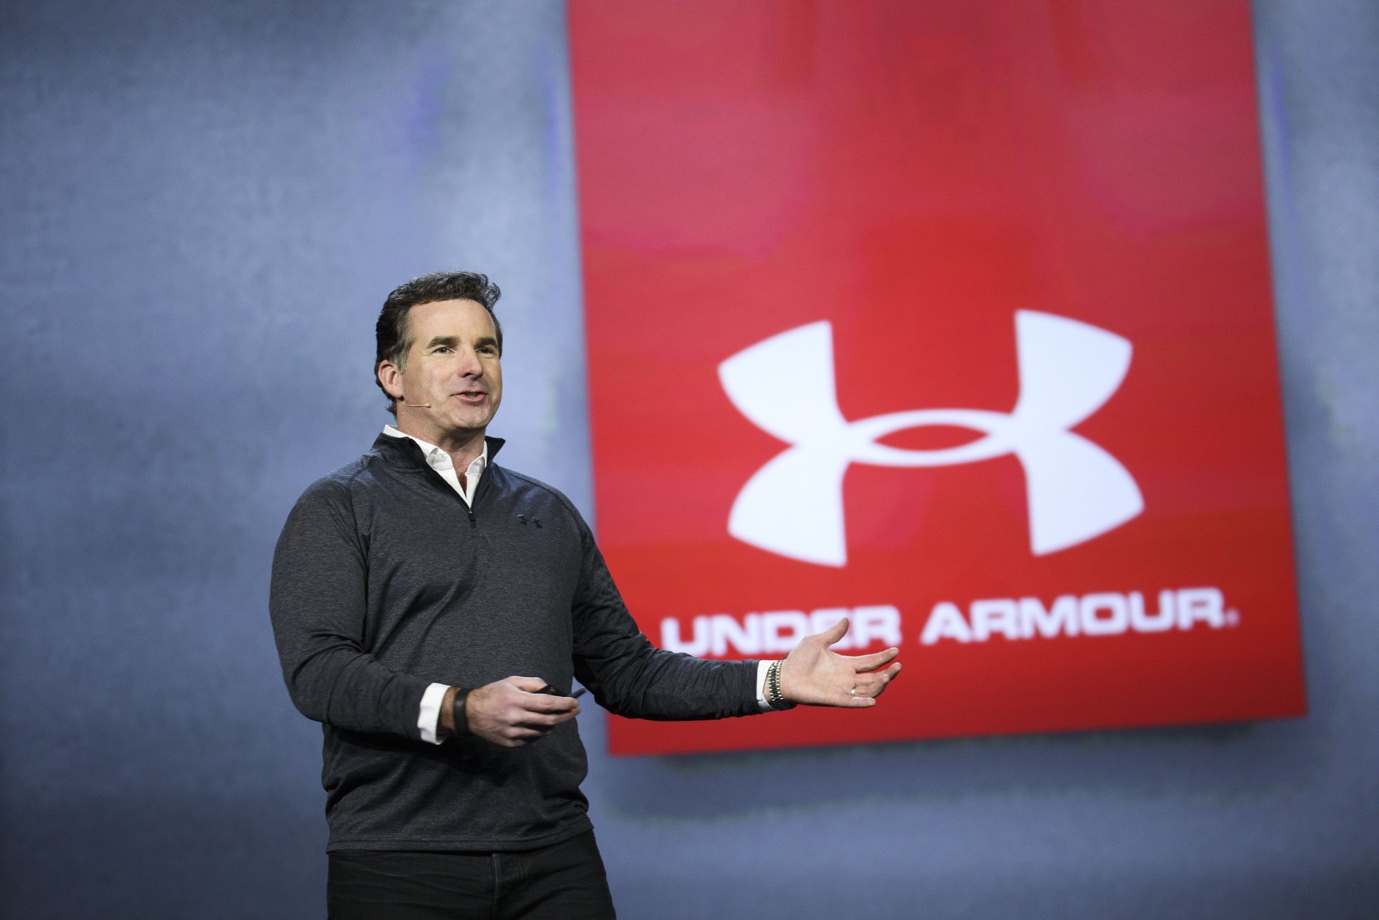 Factors Consider Before Trading Under Armour | Seeking